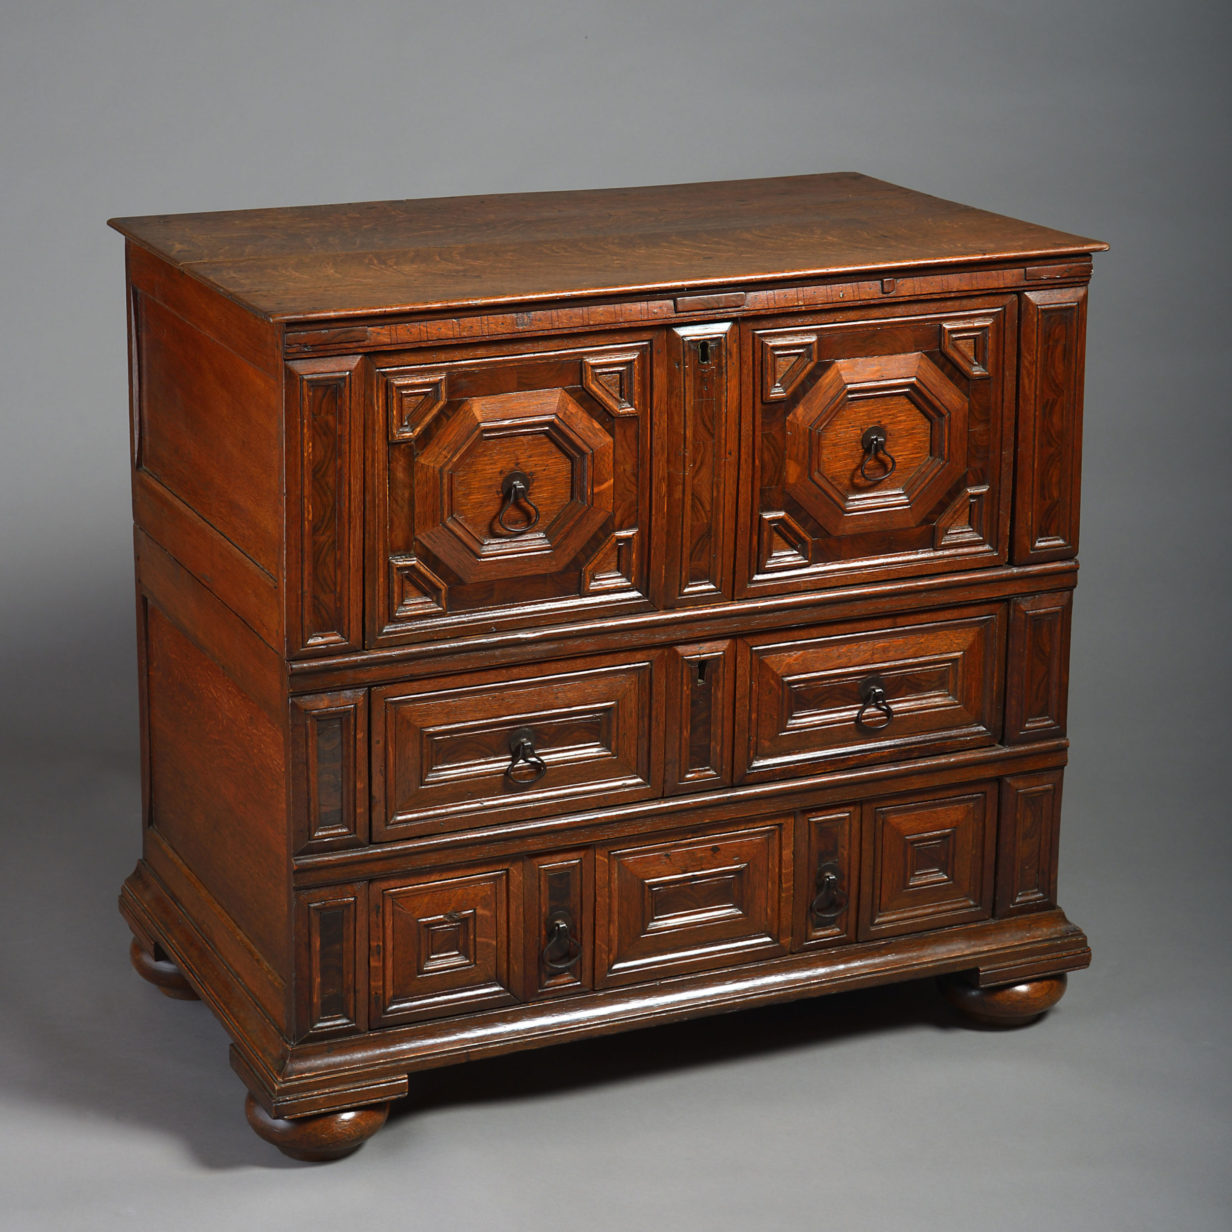 Late 17th century geometric chest of drawers